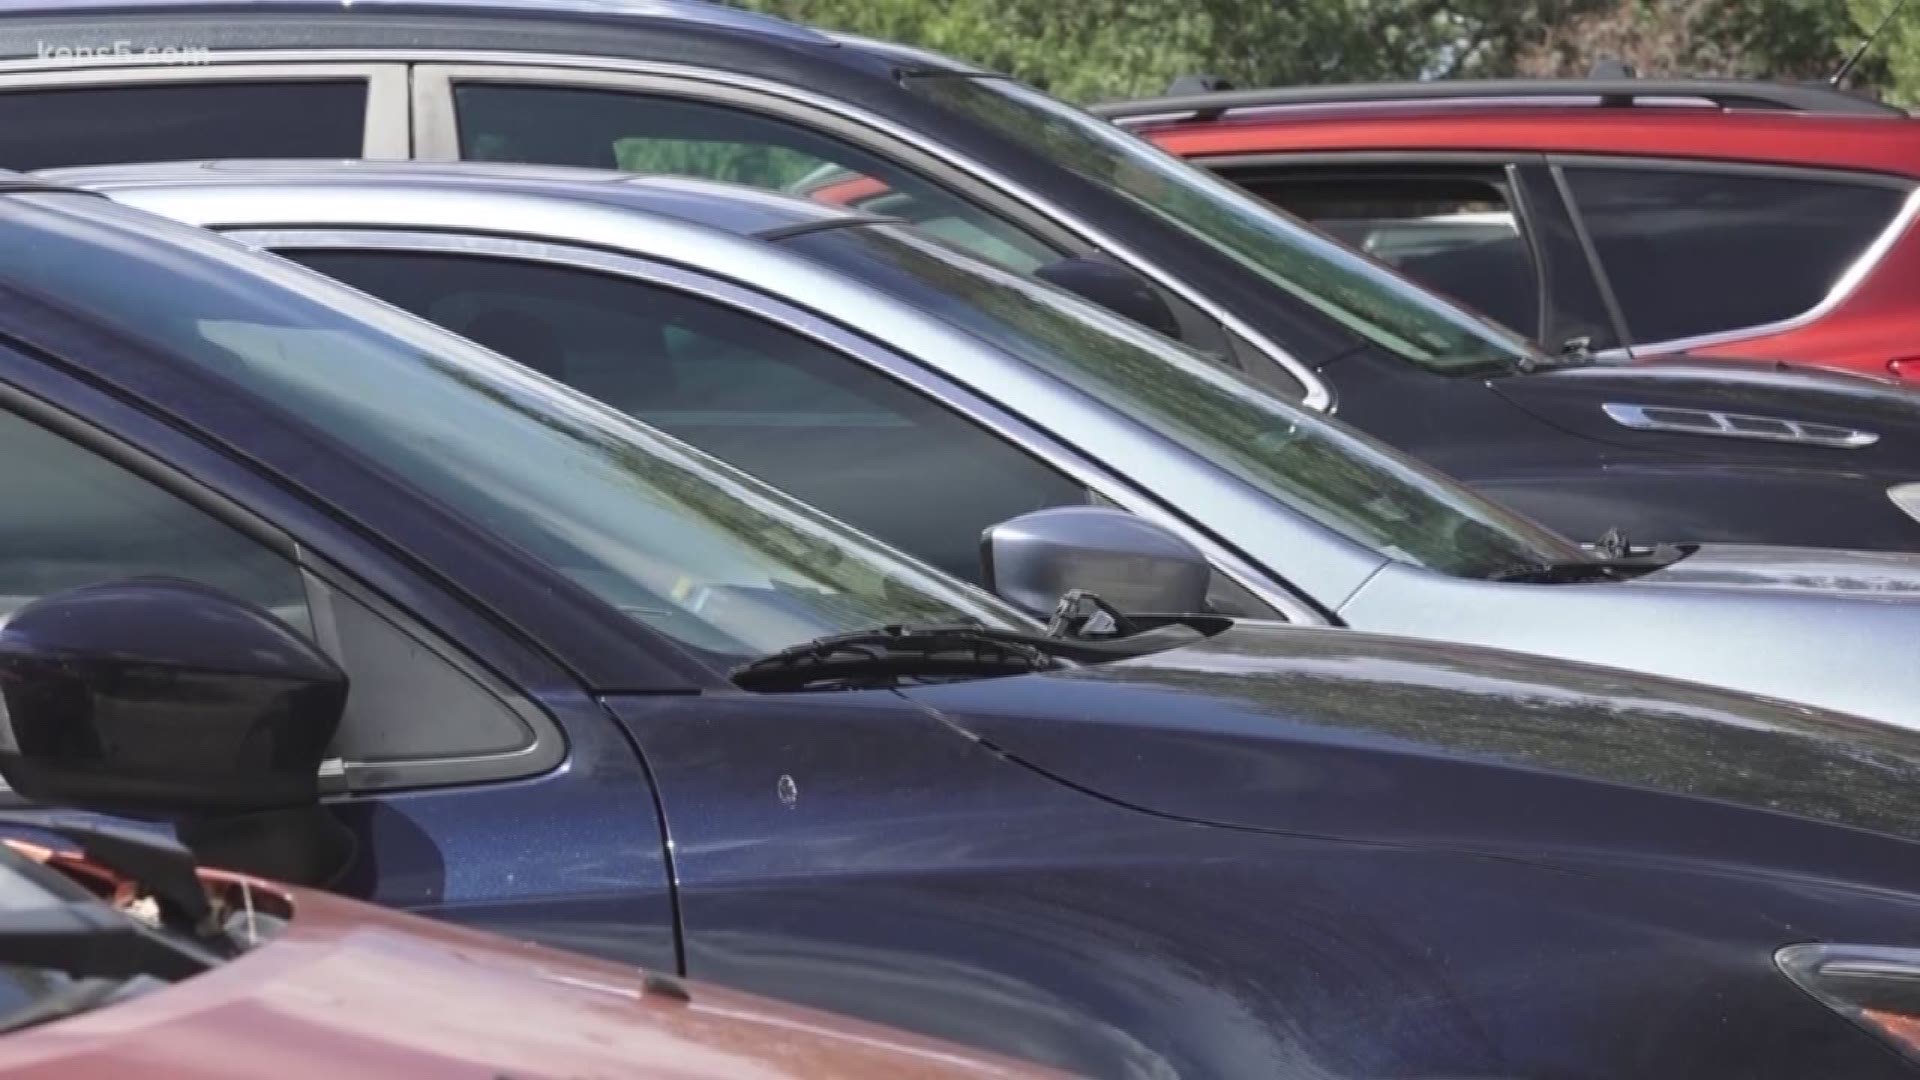 San Antonio is considering an ordinance to protect Good Samaritans when they break into cars to save children and animals locked in hot cars.